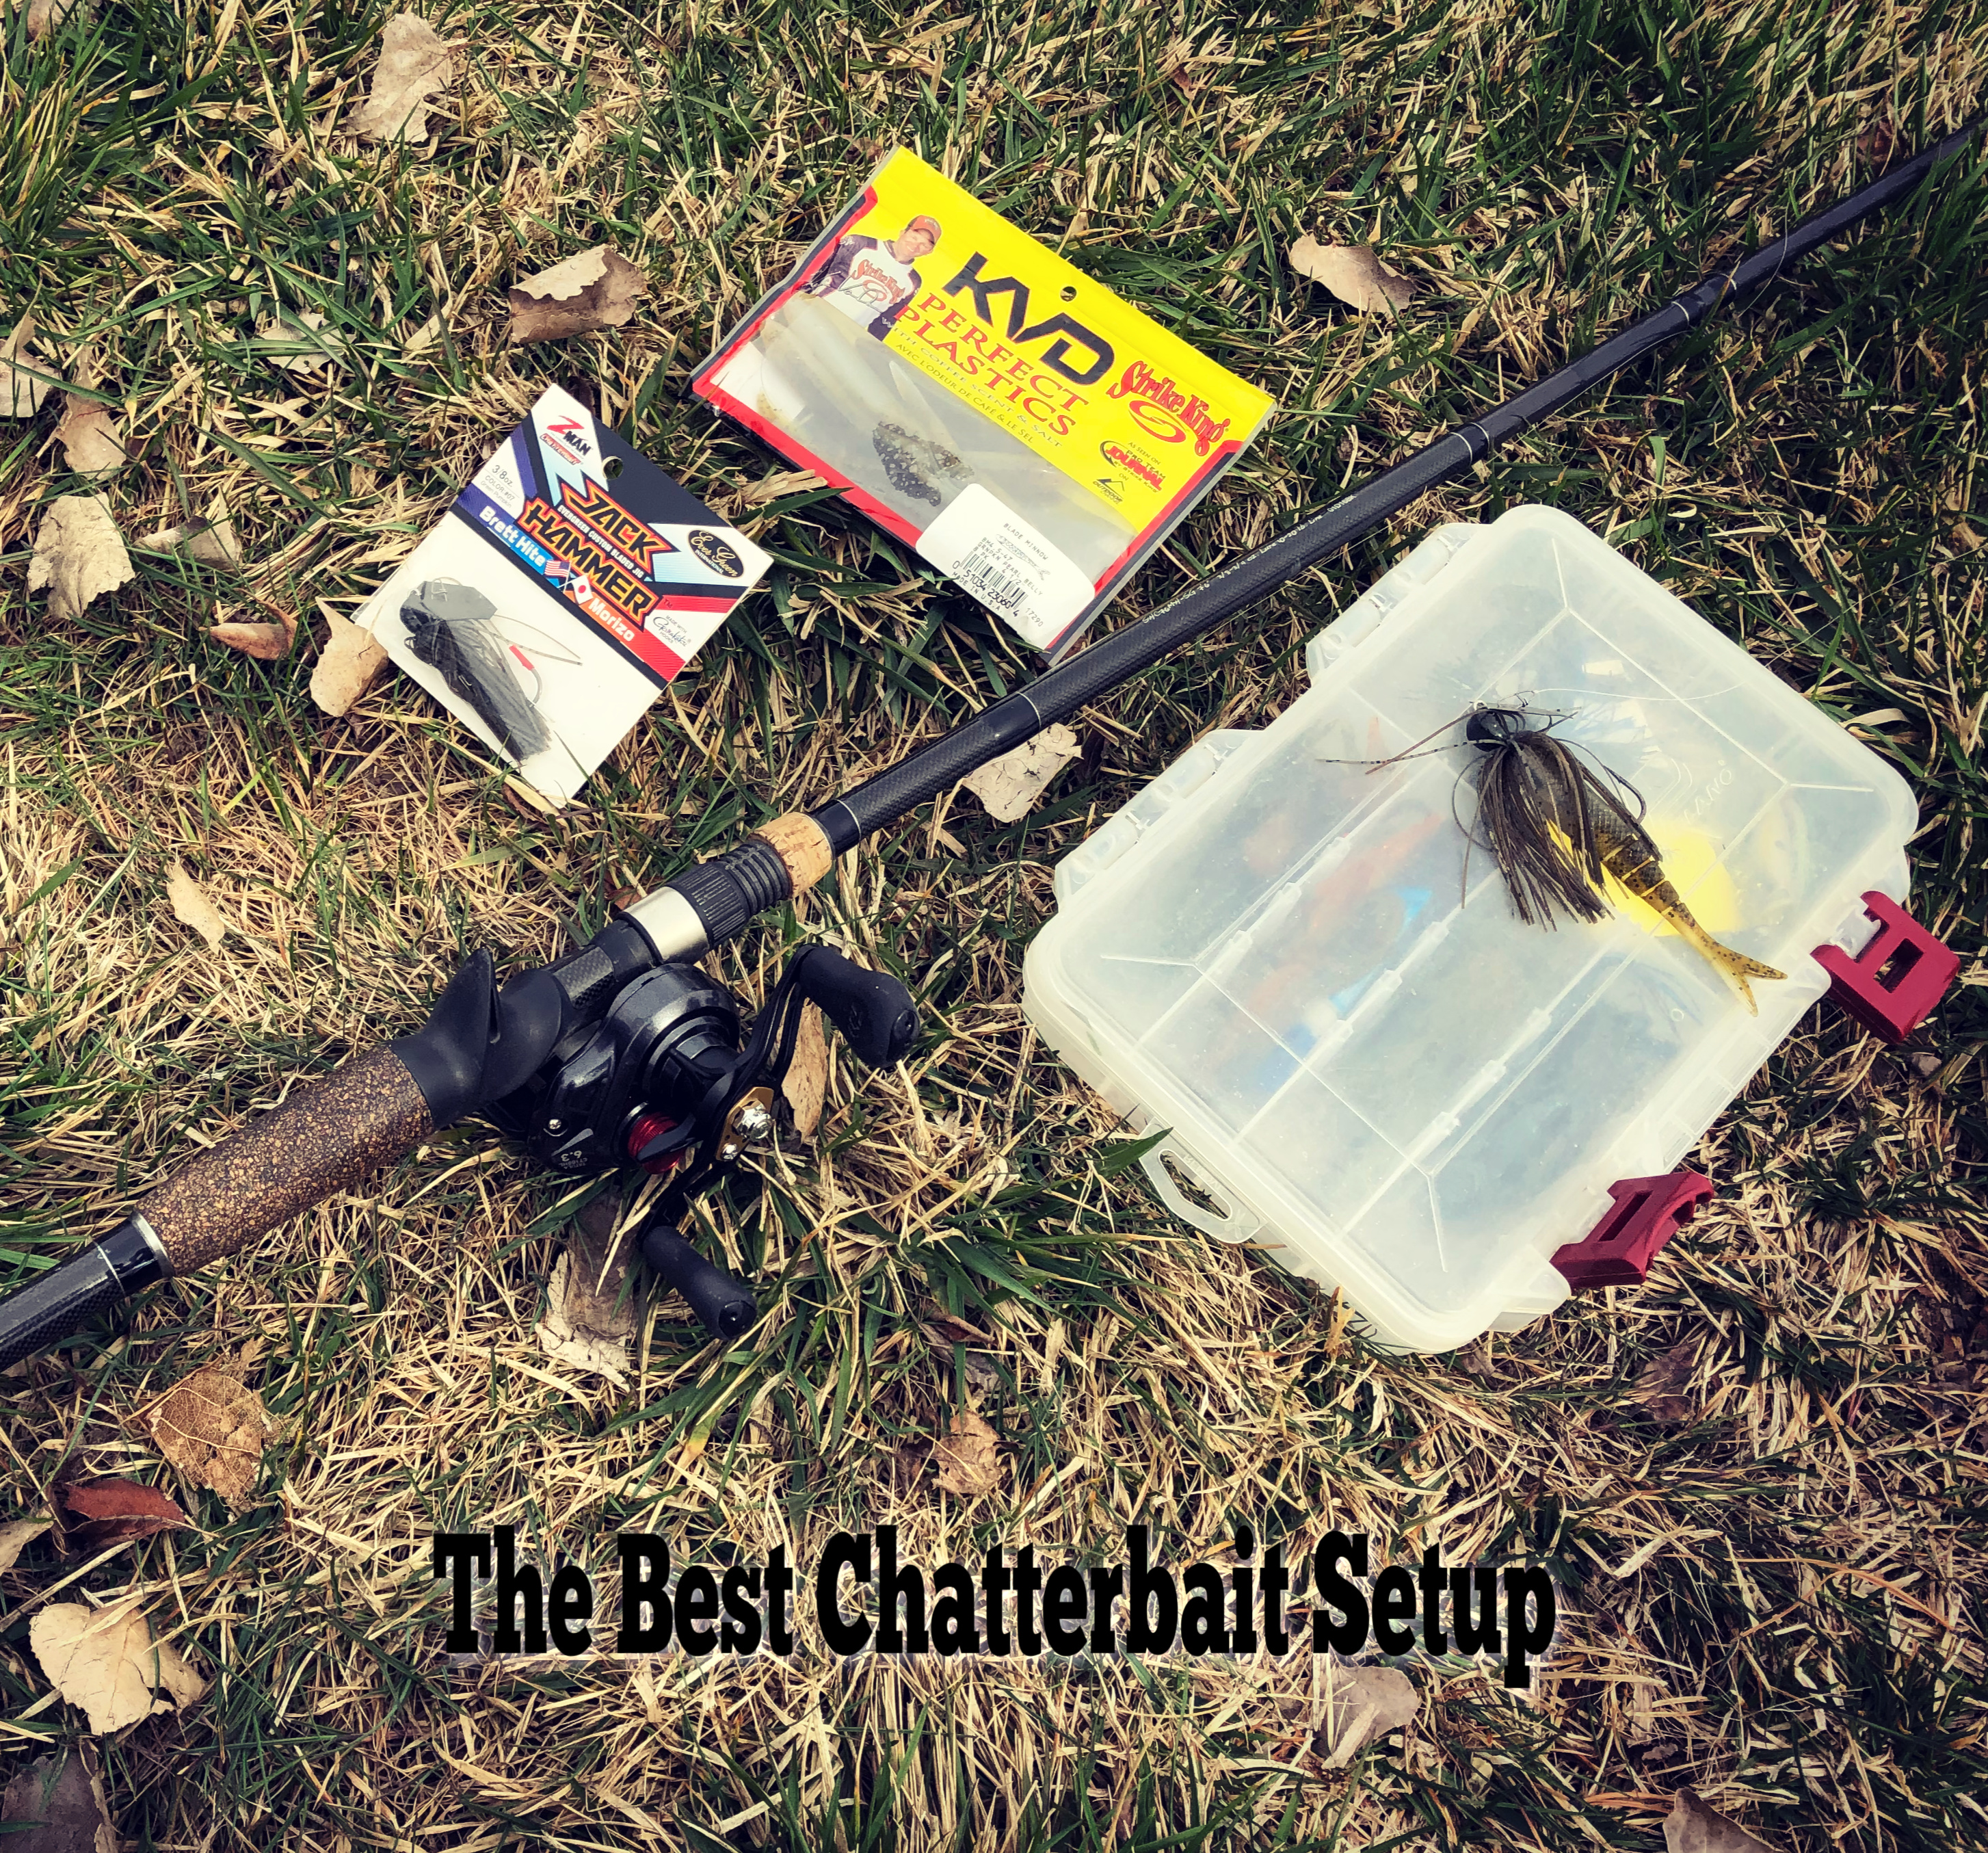 Chatterbait Setup - Why use a Chatterbait for Bass Fishing